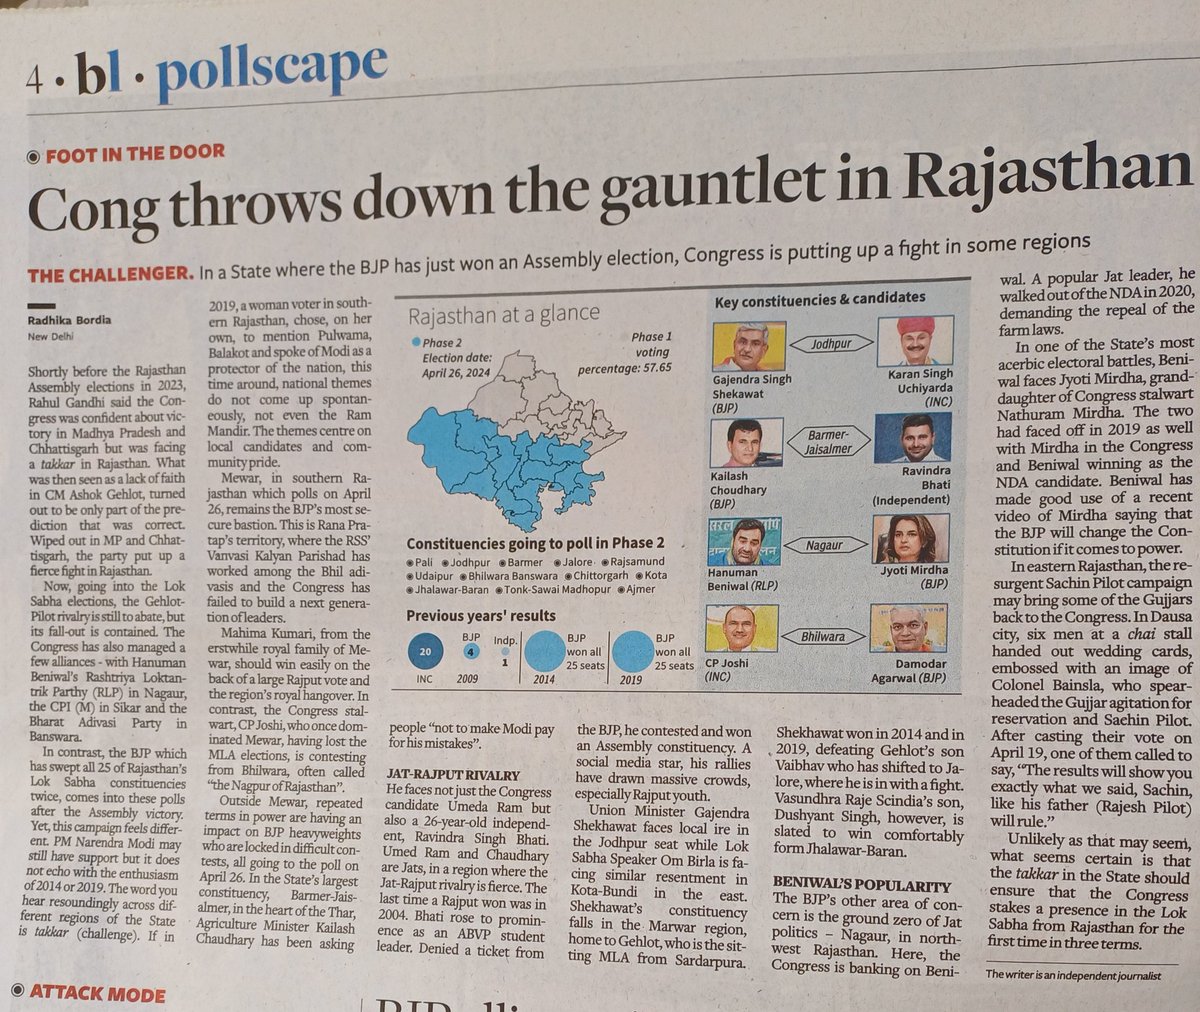 @radhikabordia has filed an excellent ground report from Rajasthan for our political pages in @businessline on why the Congress is in the game in Rajasthan